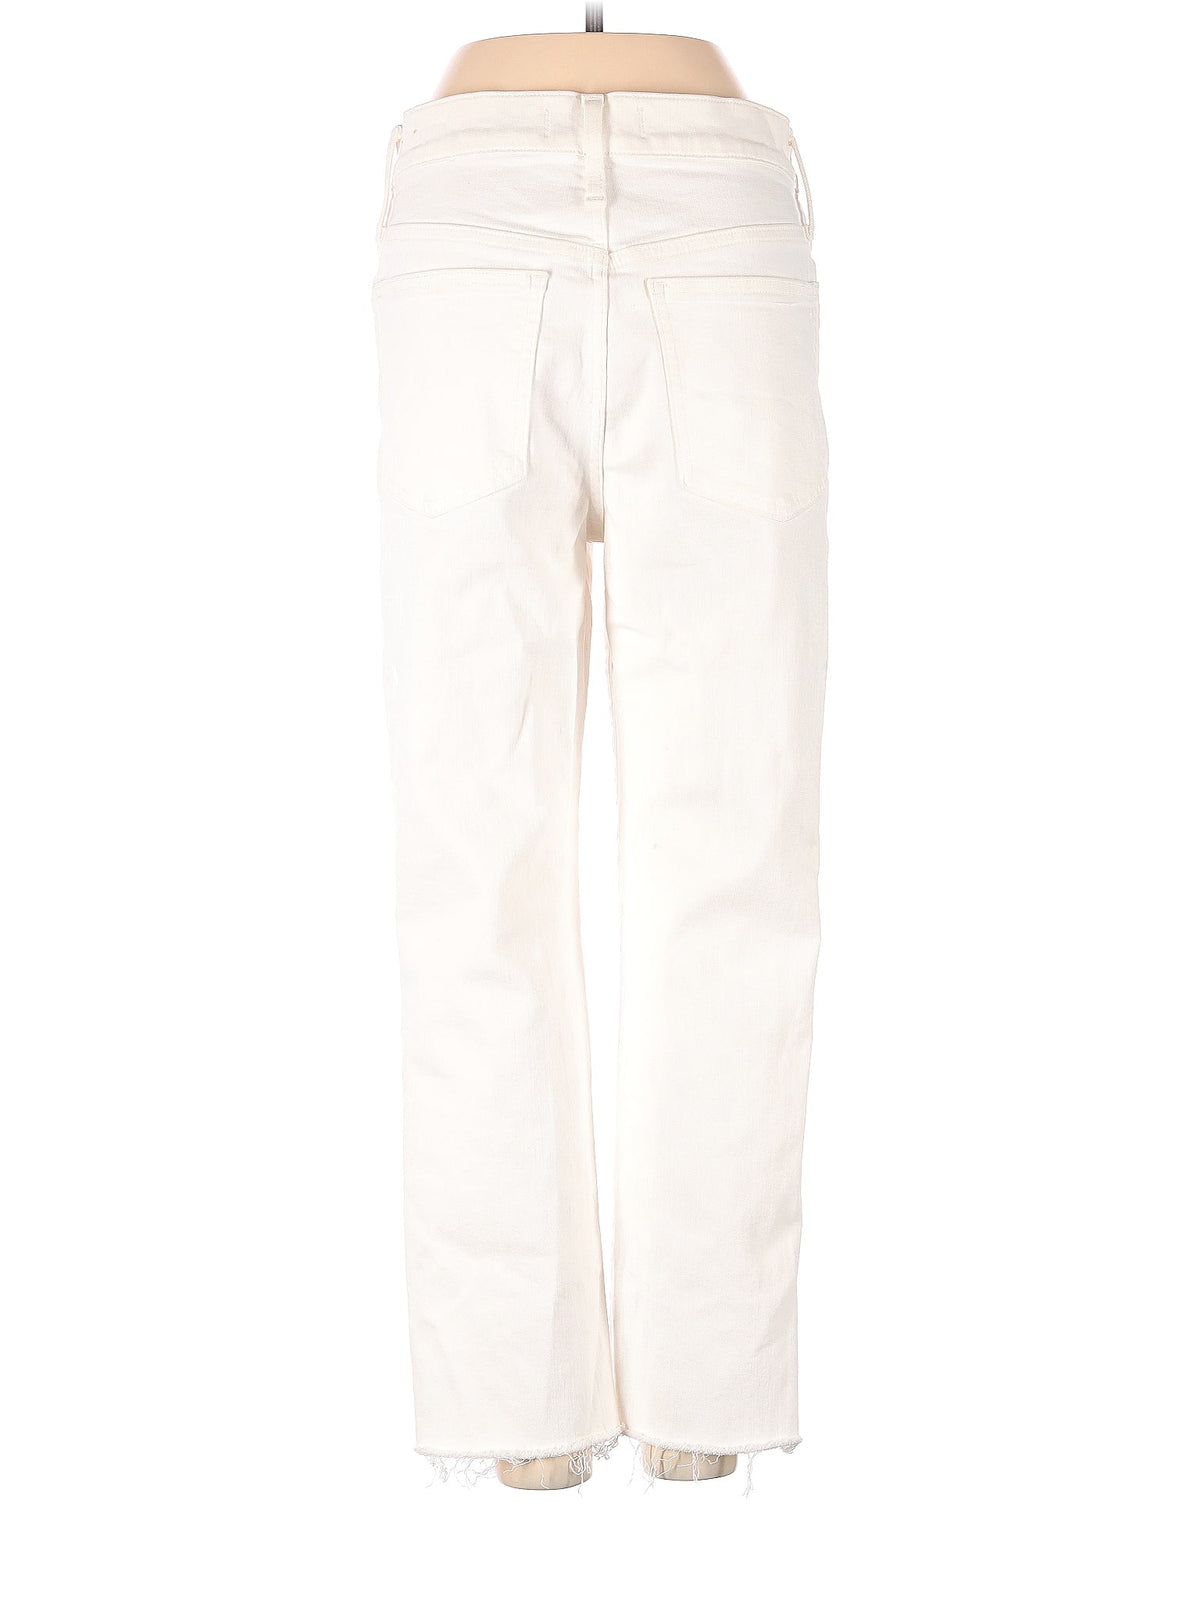 High-Rise Straight-leg Jeans in Light Wash waist size - 26 P